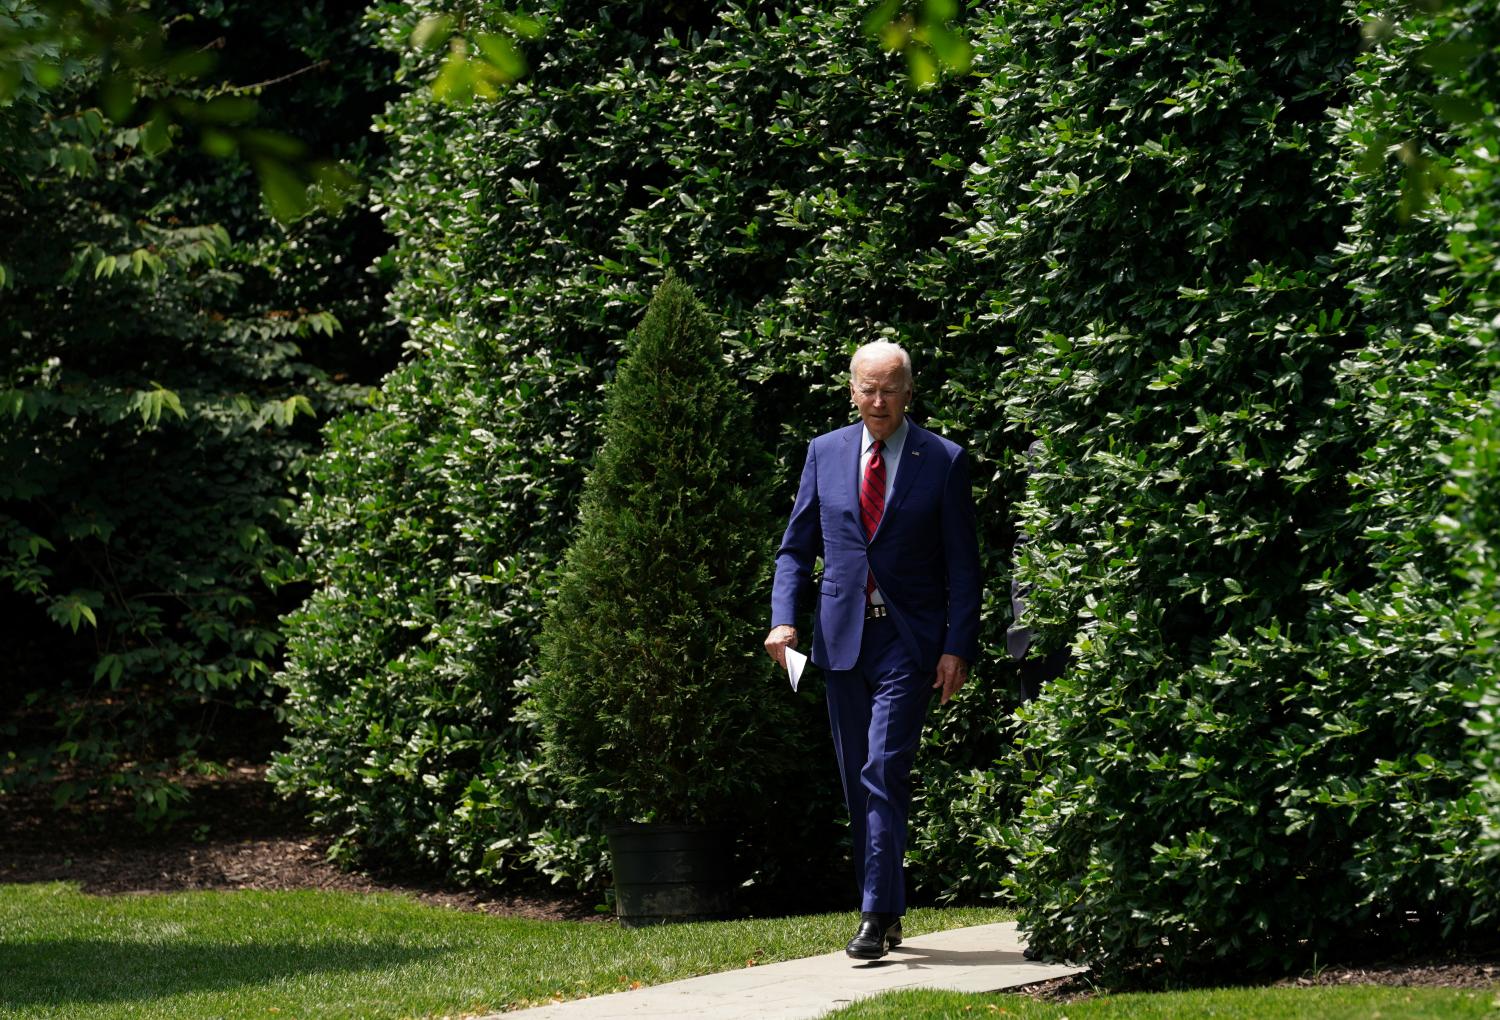 U.S. President Joe Biden walks toward the Oval Office for a meeting with Senator Chris Murphy (D-CT) to discuss gun reform at the White House in Washington, U.S., June 7, 2022. REUTERS/Kevin Lamarque